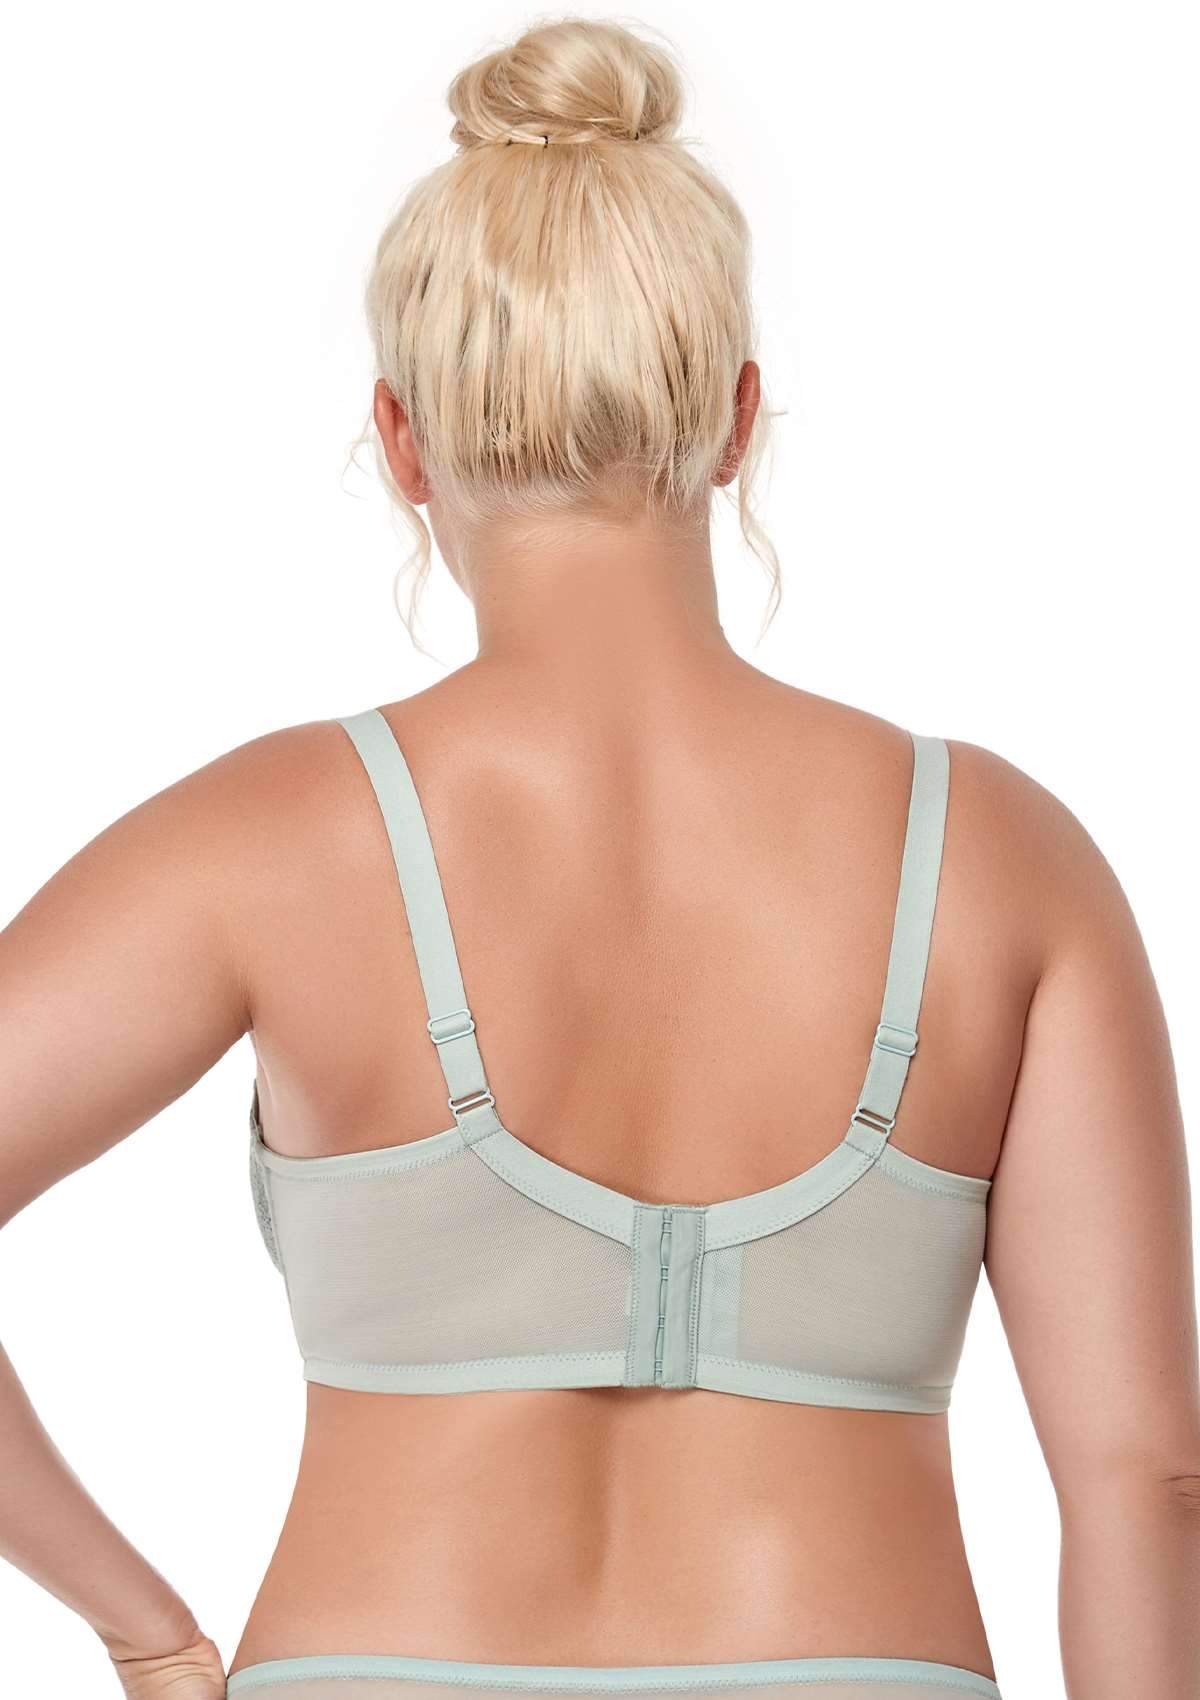 HSIA All-Over Floral Lace: Best Bra For Elderly With Sagging Breasts - Pewter Blue / 42 / DDD/F